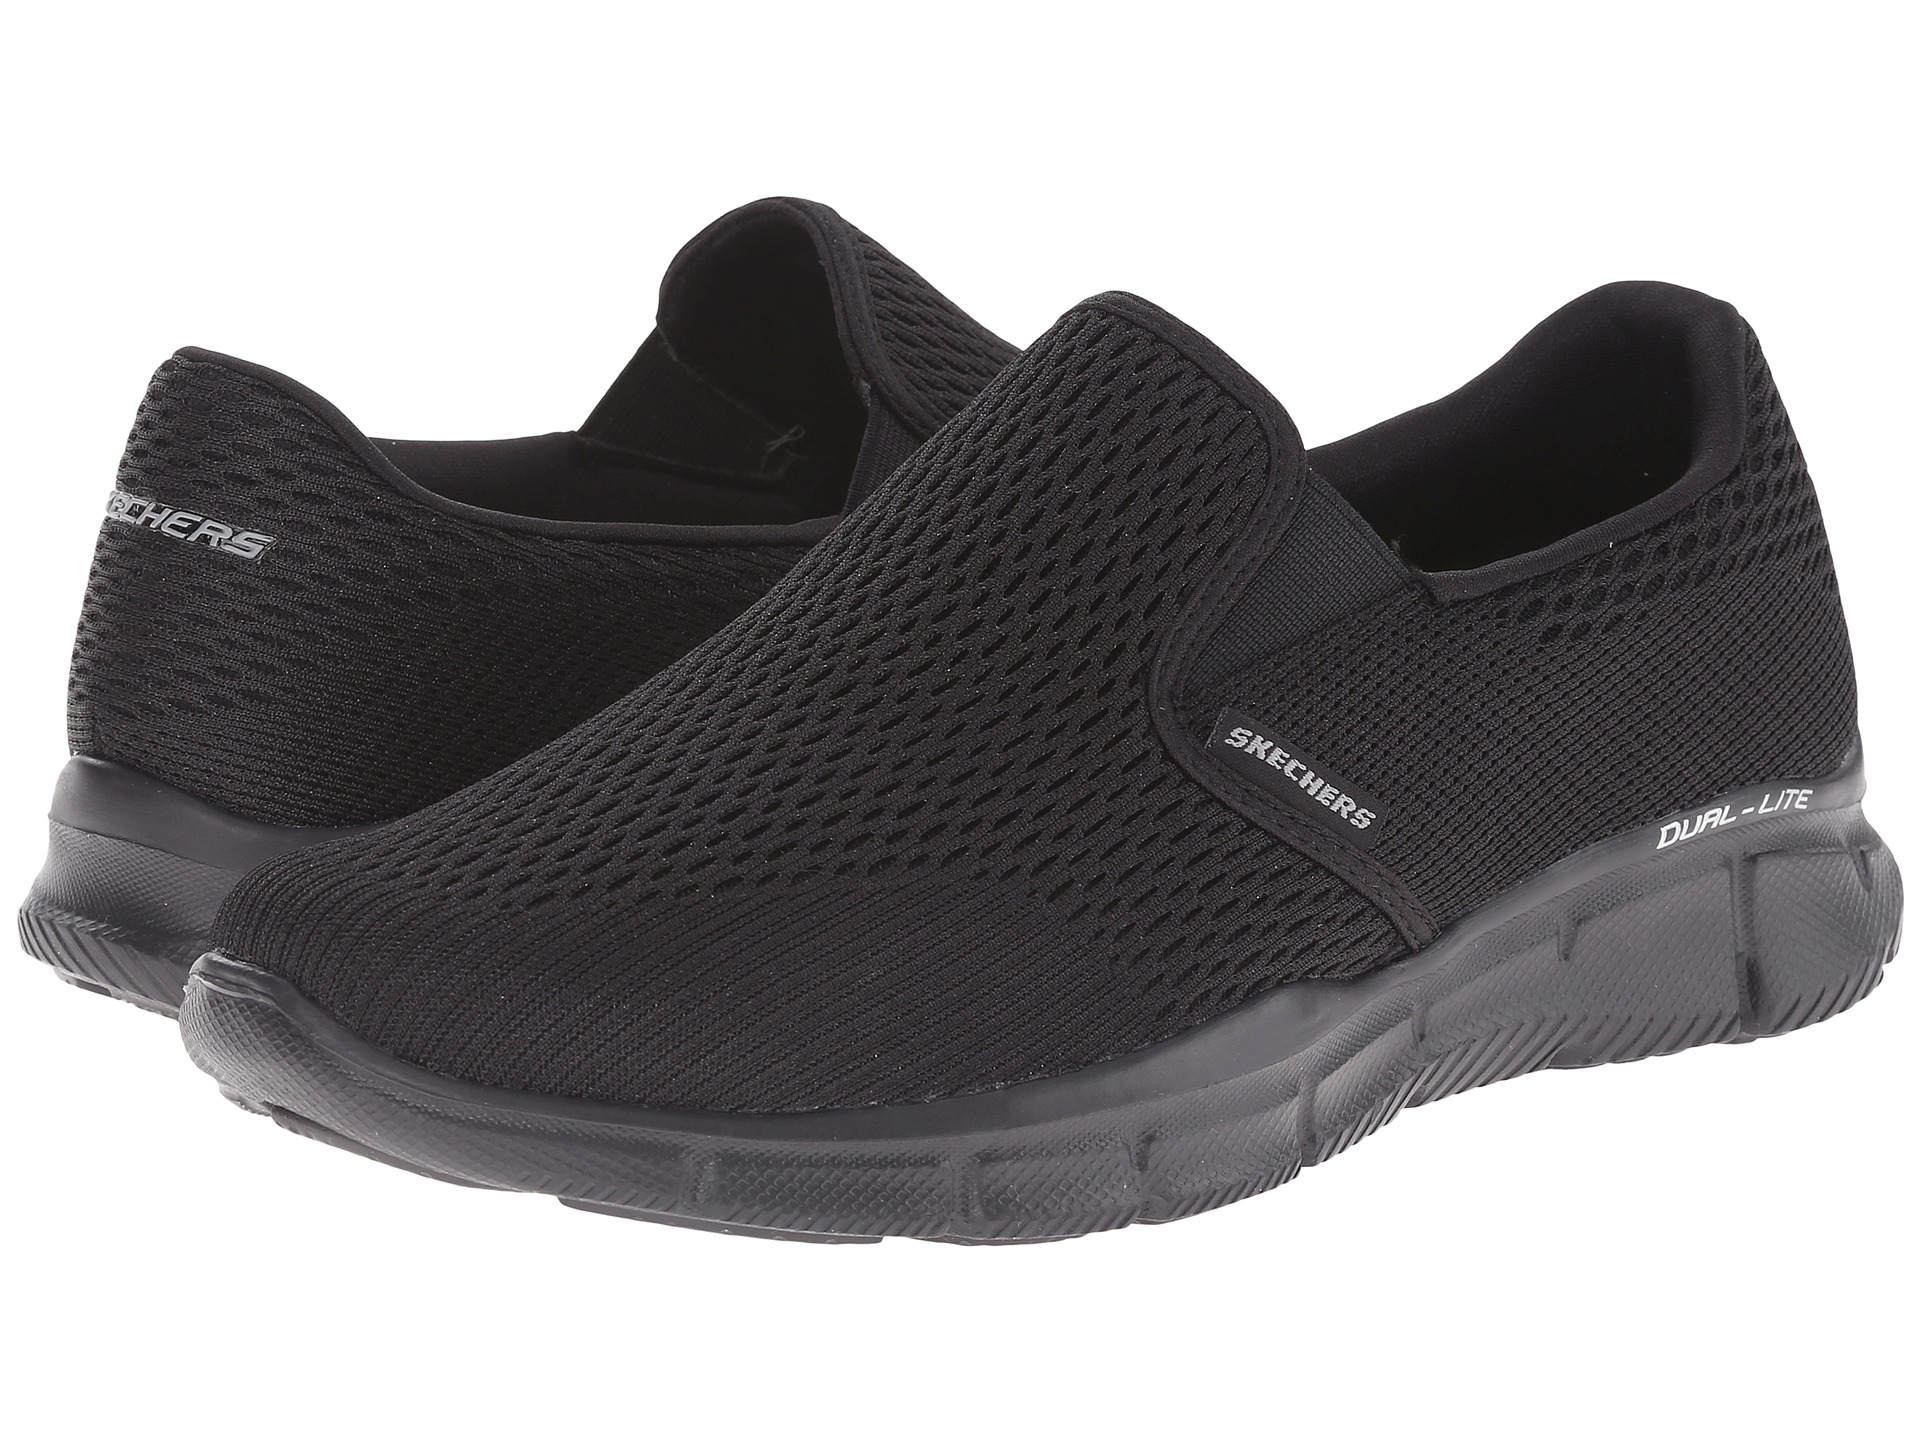 SKECHERS Equalizer Double Play at Zappos.com